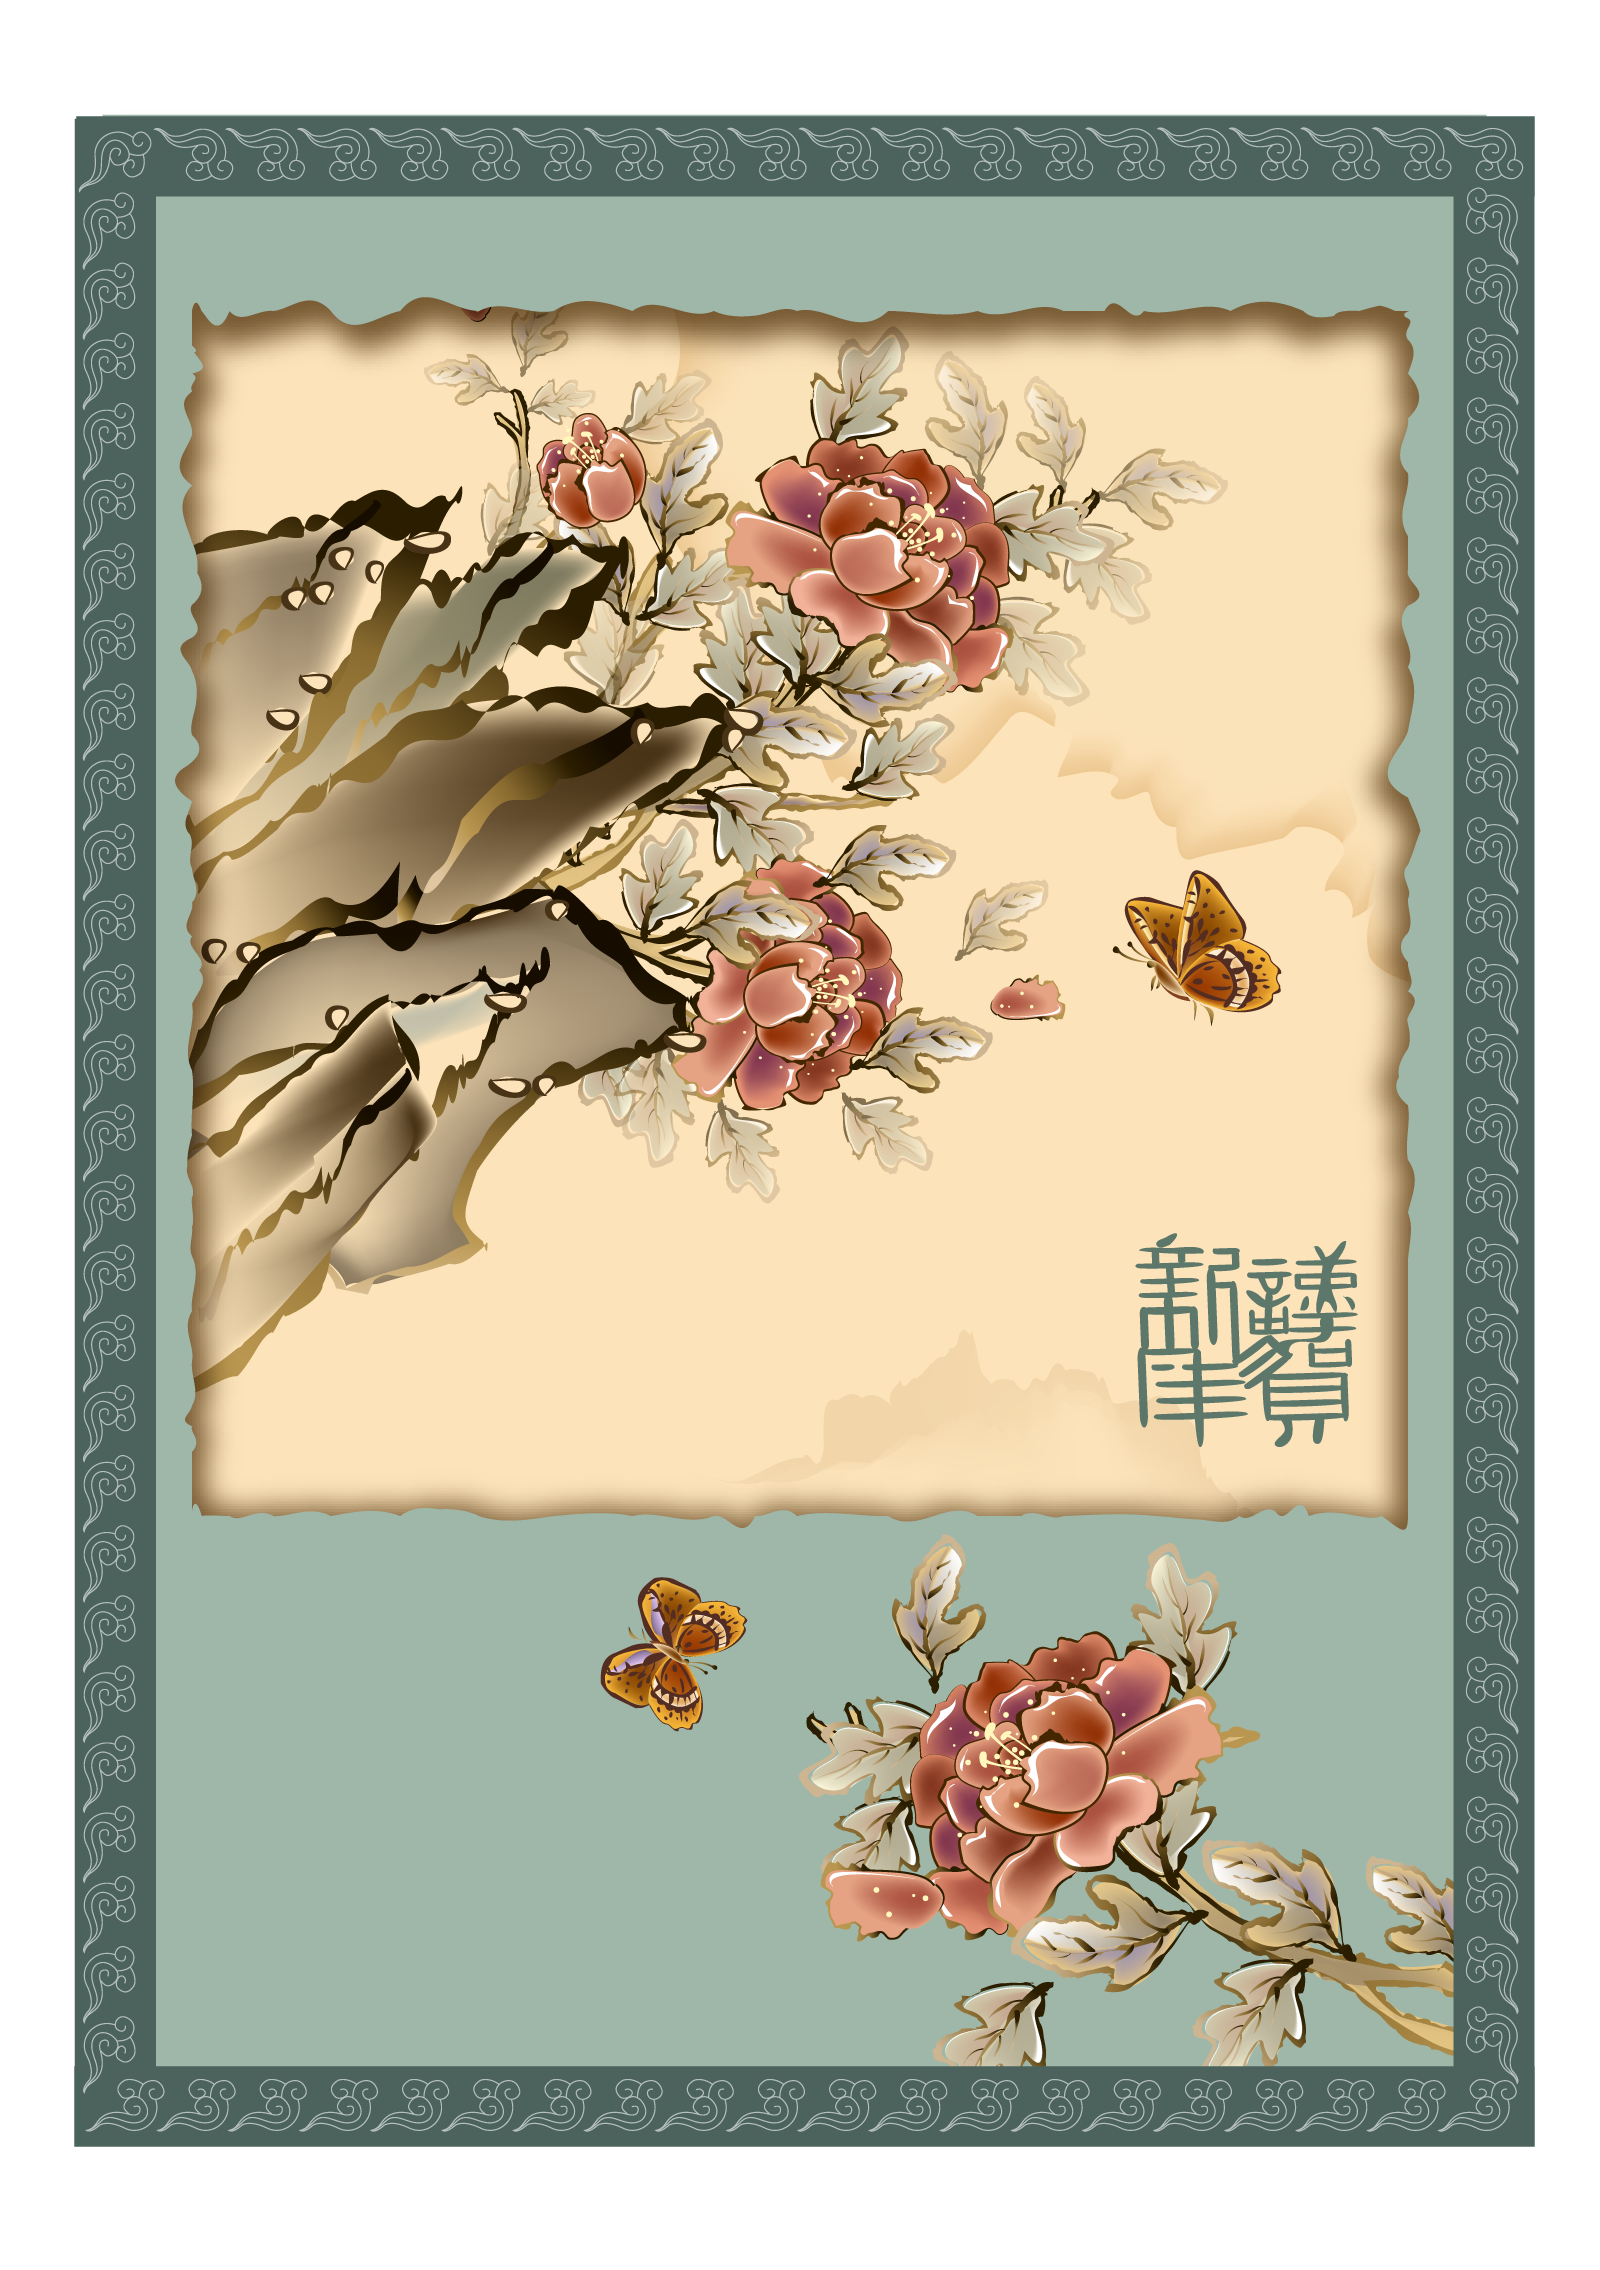 Chinese classical painting background effect Illustrations Vectors AI free download